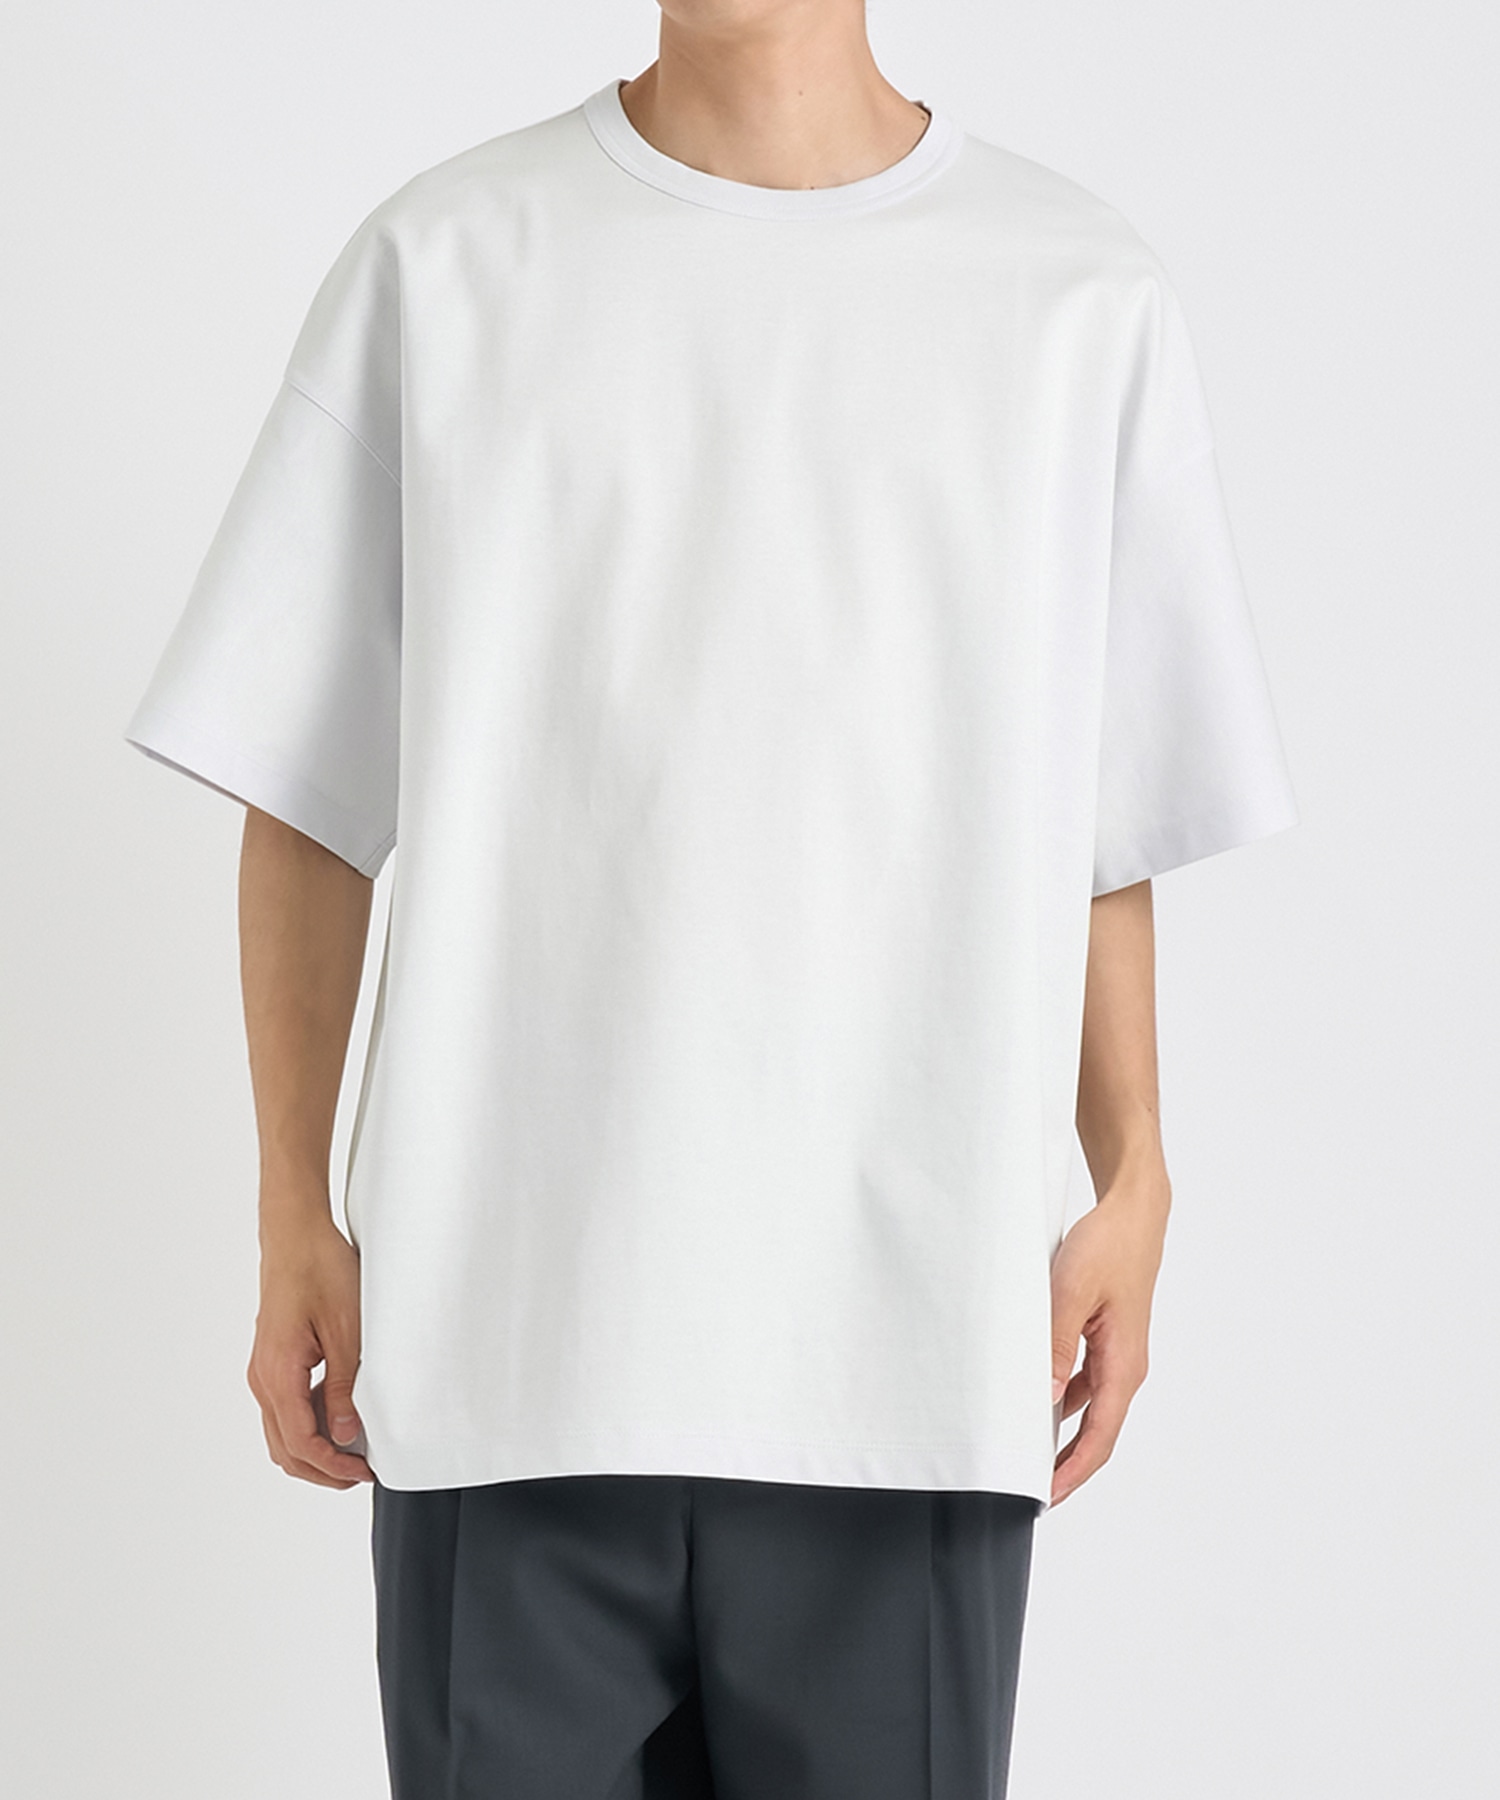 THE SUPER OVER SIZE T-SHIRT